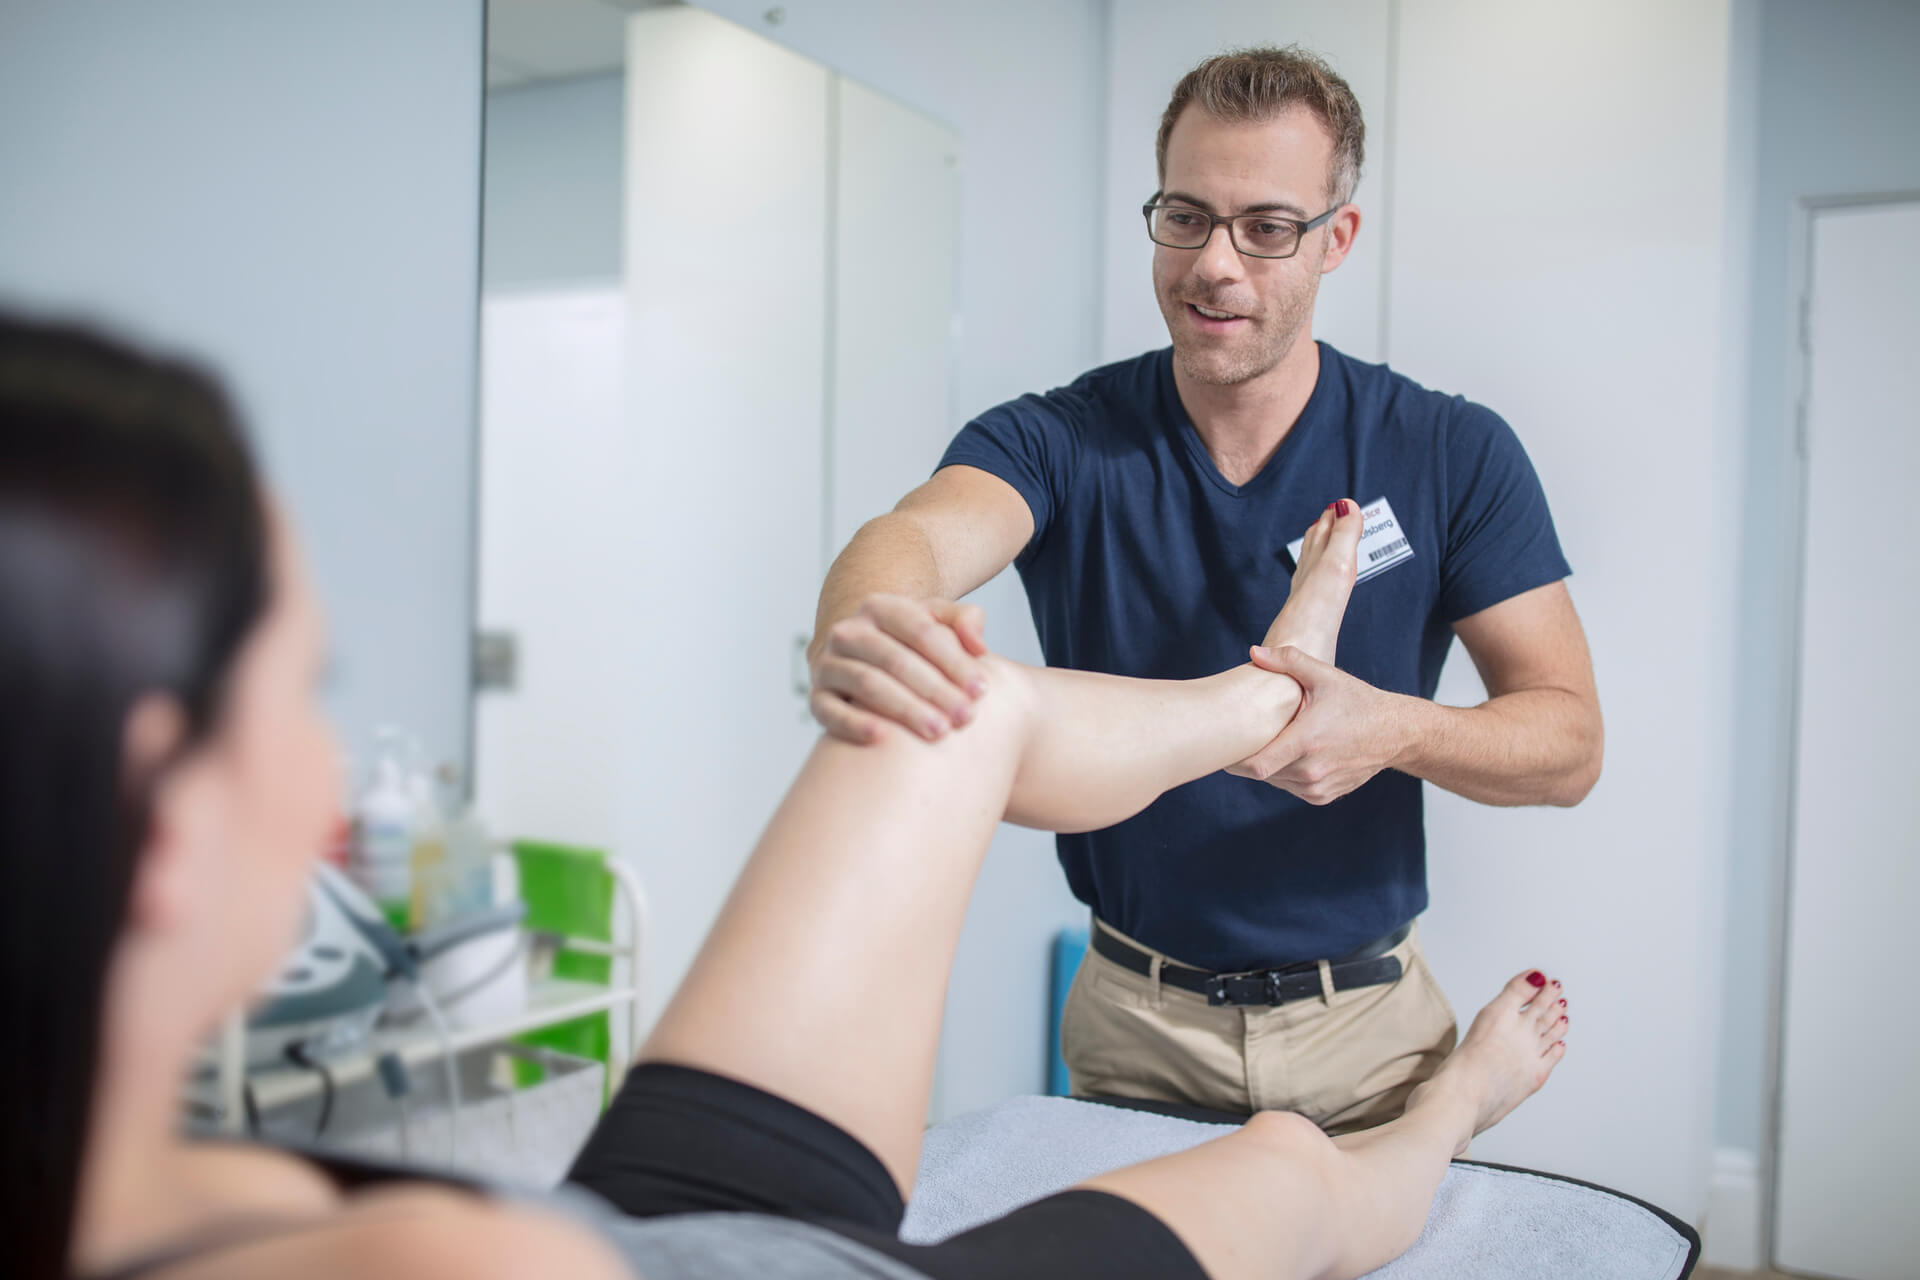 Physio assists patient with leg mobility